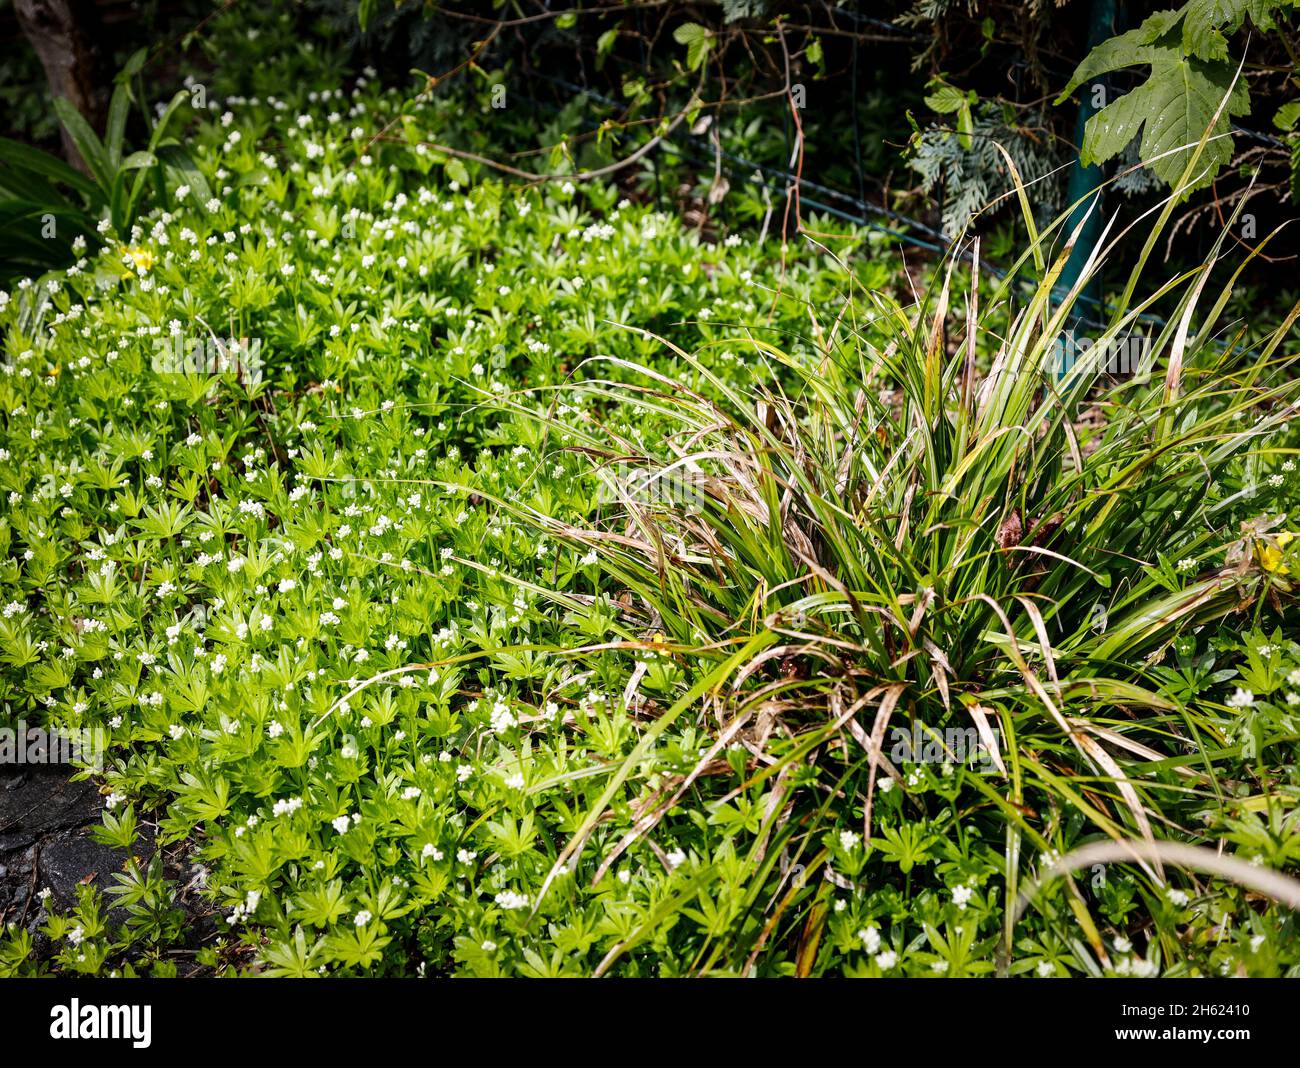 woodruff with flowers in may Stock Photo